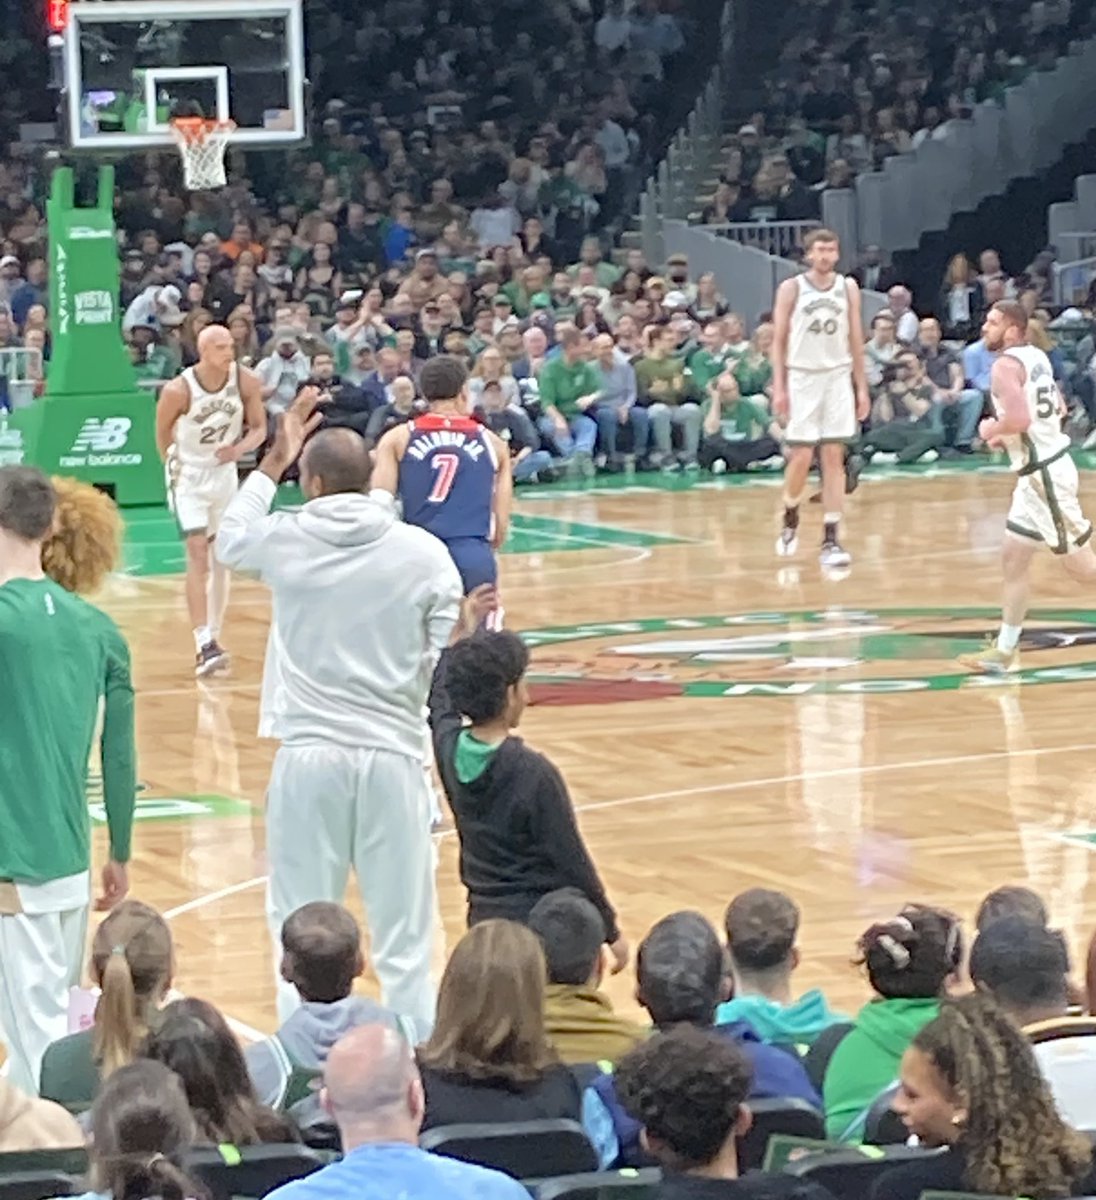 Horford and his son Ean absolutely locked in lol. This was after Svi’s layup.